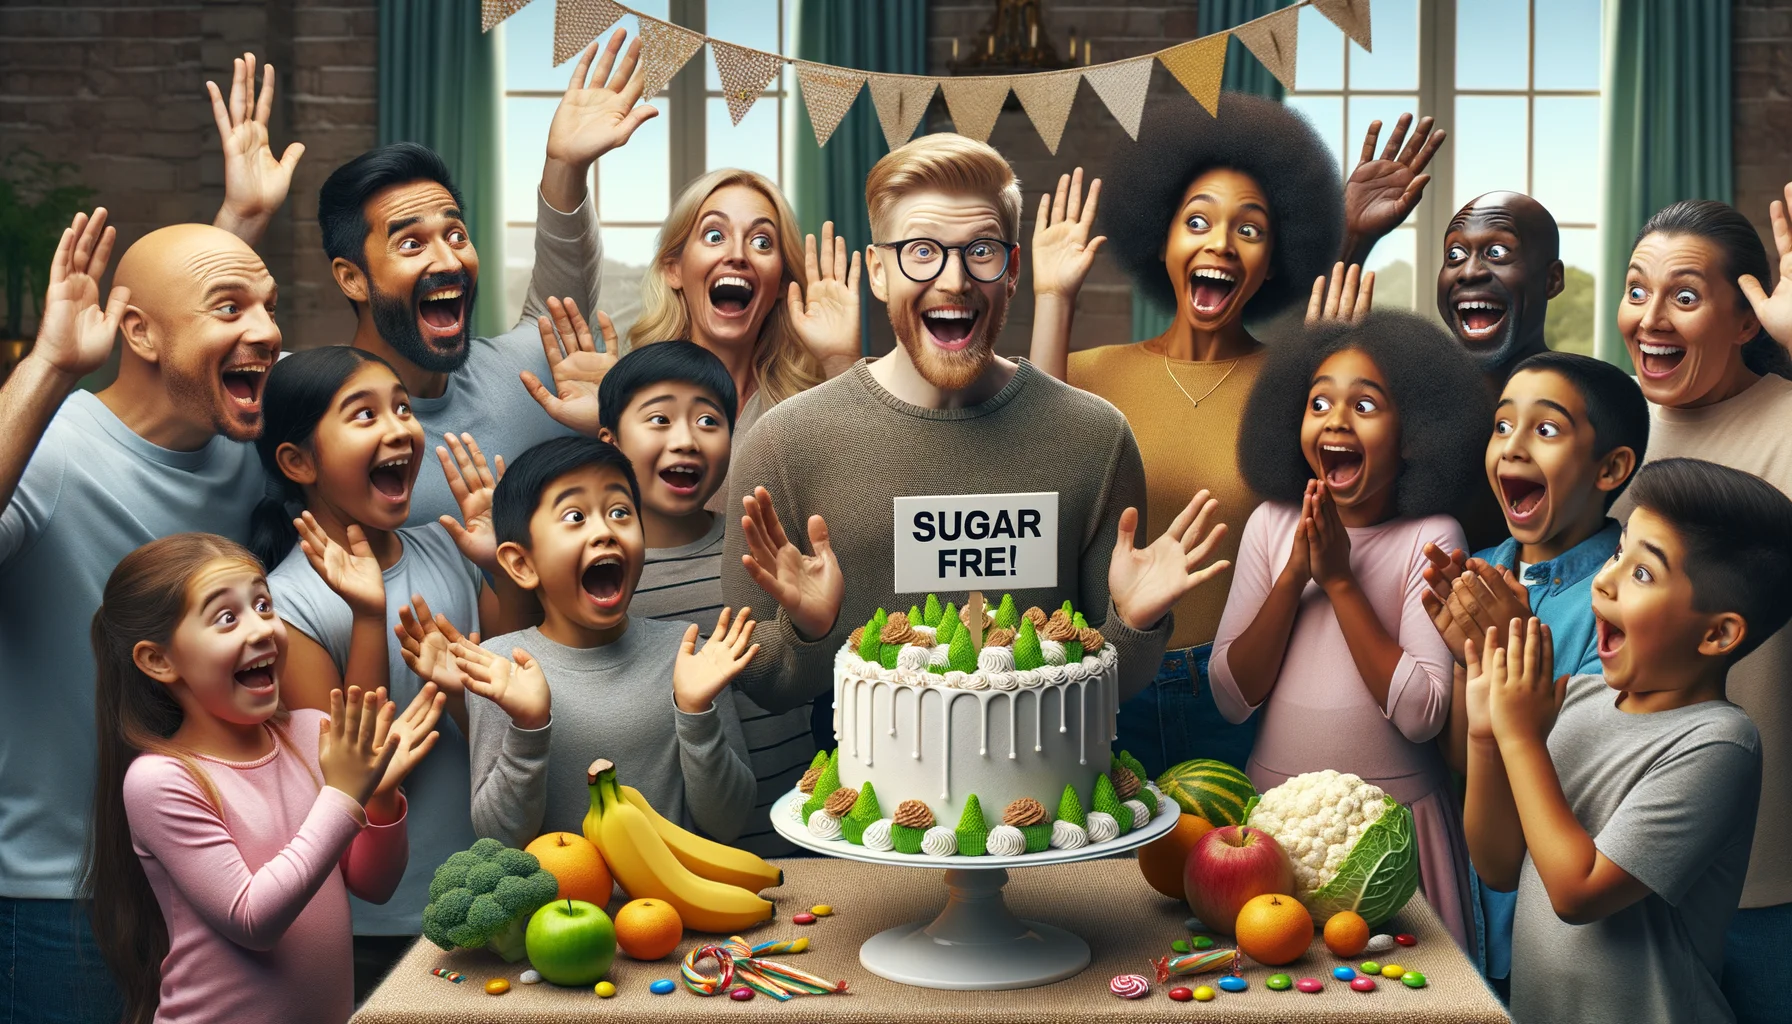 Imagine a humorous and realistic scene perfectly illustrating low-sugar treats for children's parties. In the middle of the room, a magnificent cake is presented with a sign: 'Sugar-Free!', causing astonished expressions among the Caucasian, Hispanic, and Black kids. Enthusiastic parents exchange high-fives in the background. To the side, a South Asian girl with a big grin puts a vegetable disguised as a candy in her friend's bag, while a Middle-Eastern boy poses next to a fruit bouquet with surprised eyes. Let's make it light, colorful, and full of good vibes!